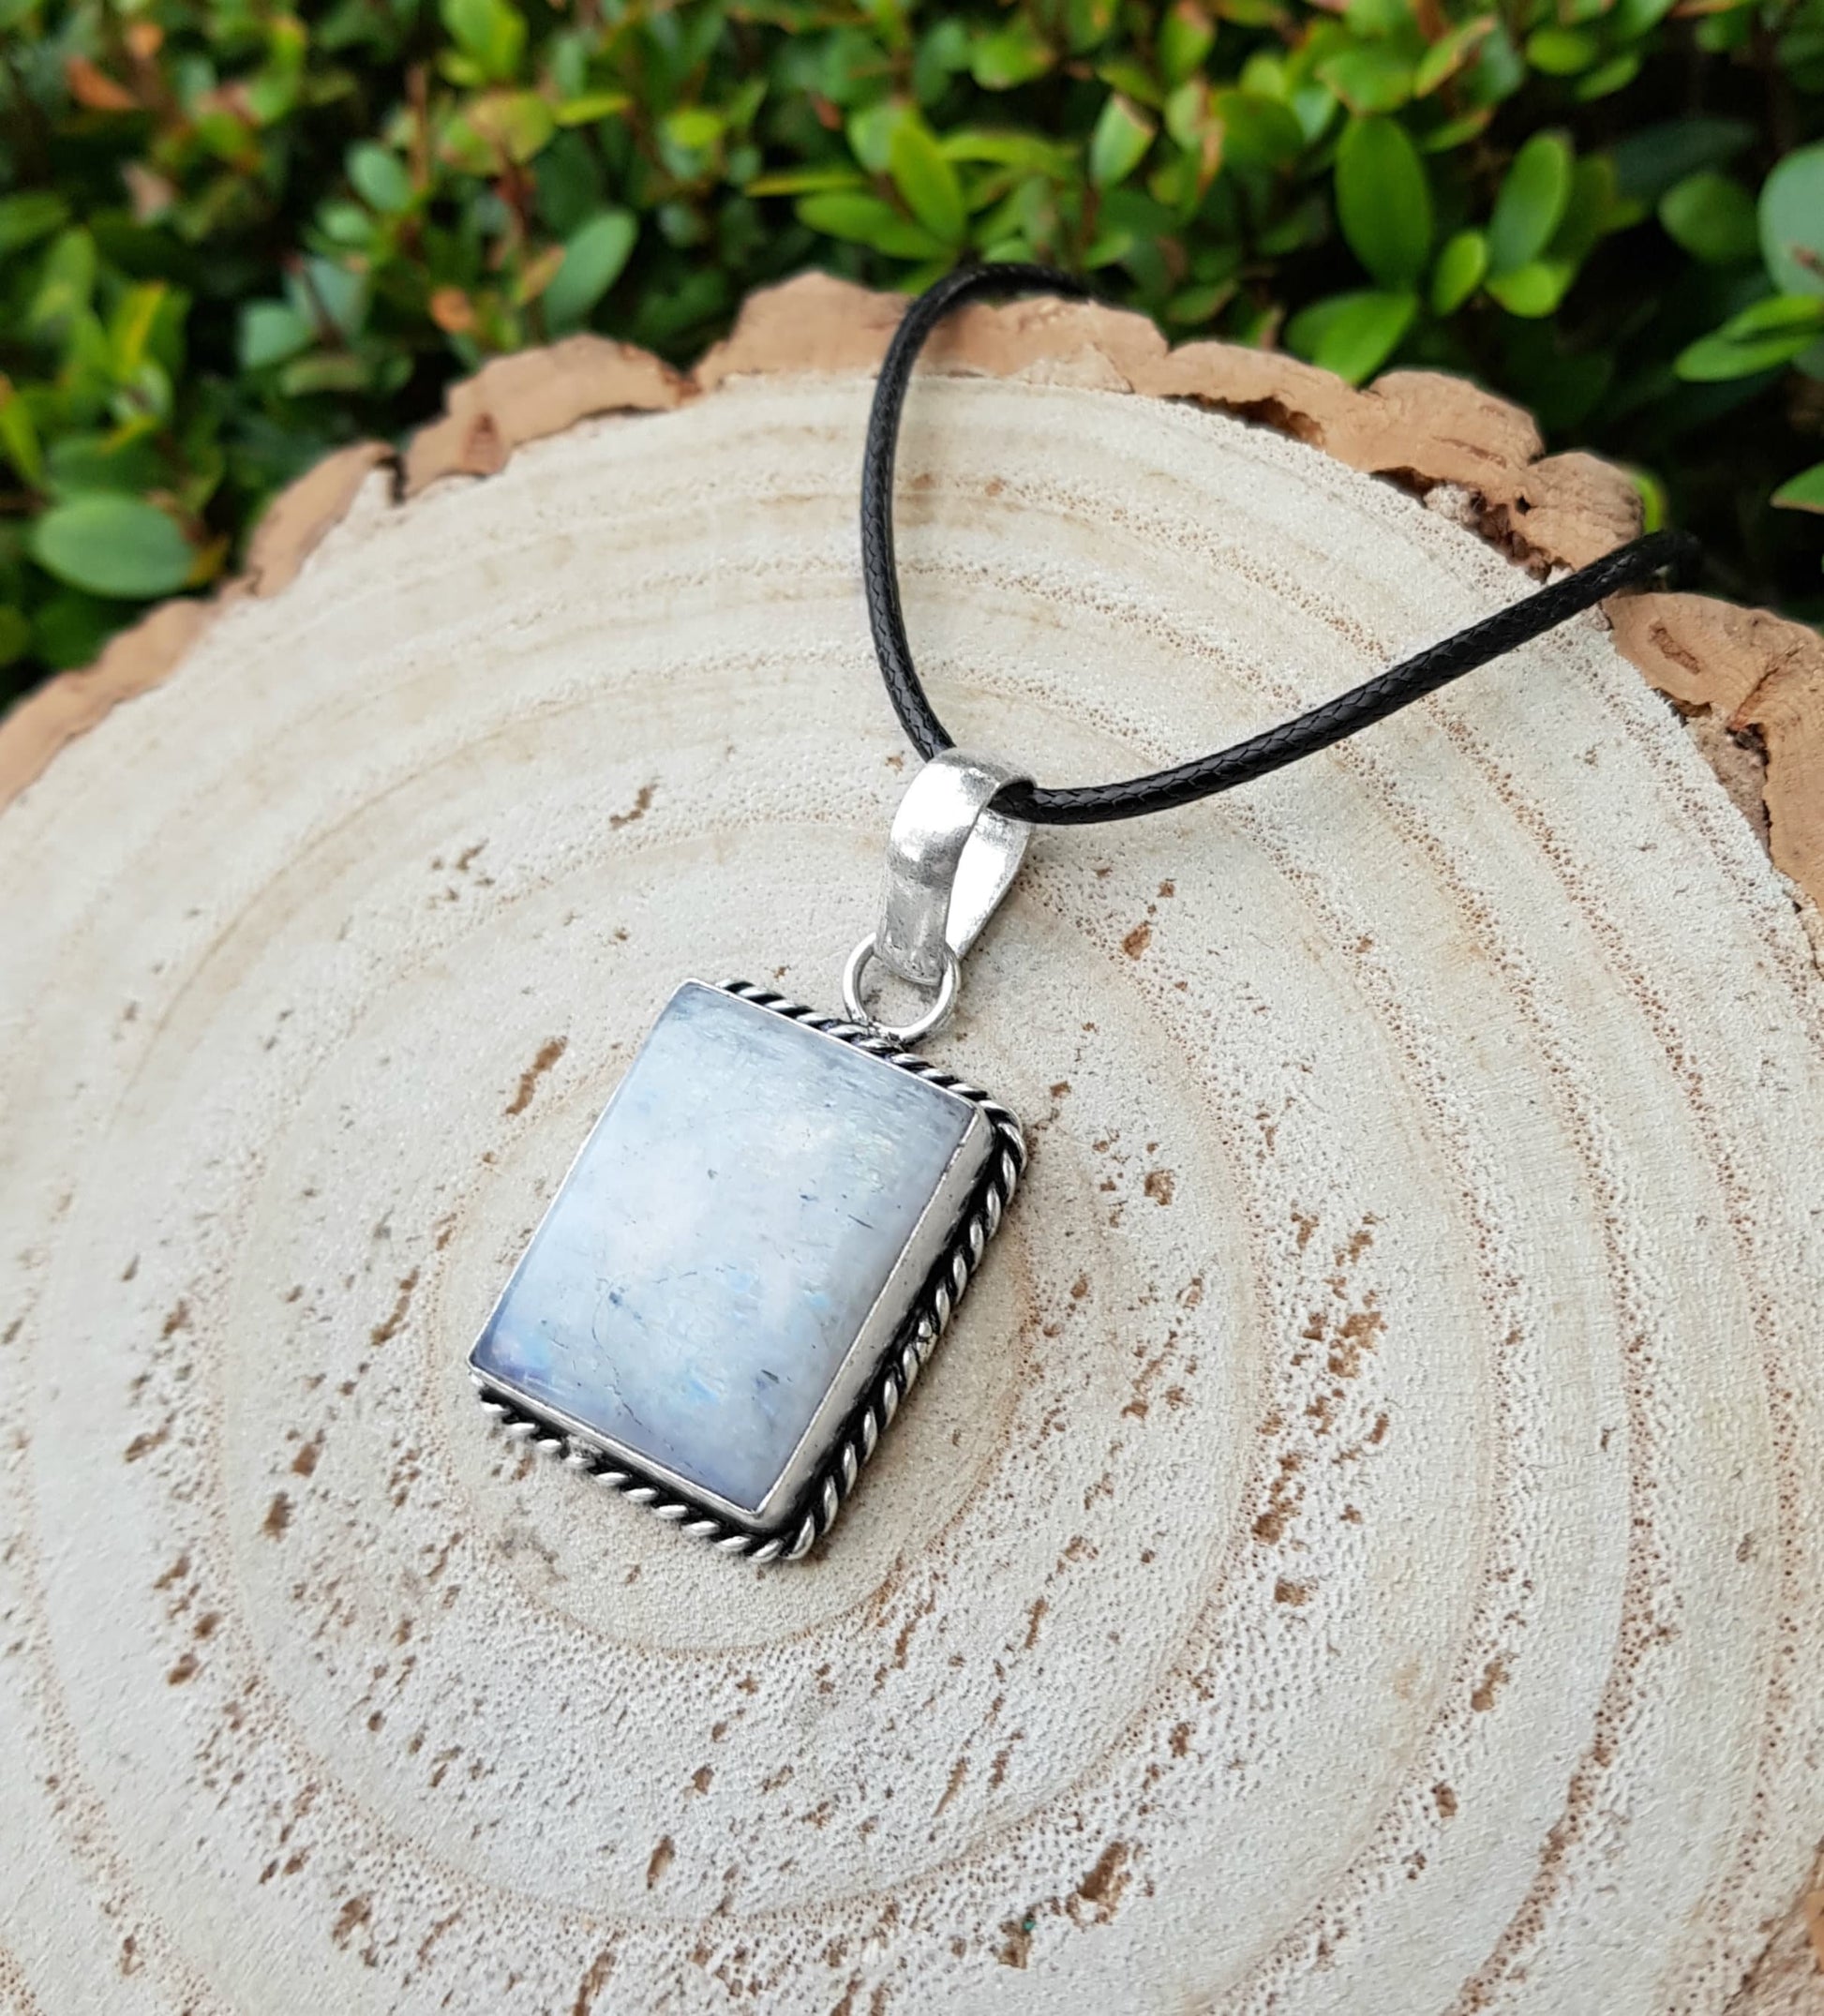 Rainbow Moonstone Pendant In Sterling Silver Minimal Moonstone Necklace Boho Pendant Unique Gift For Her One Of A Kind Gift